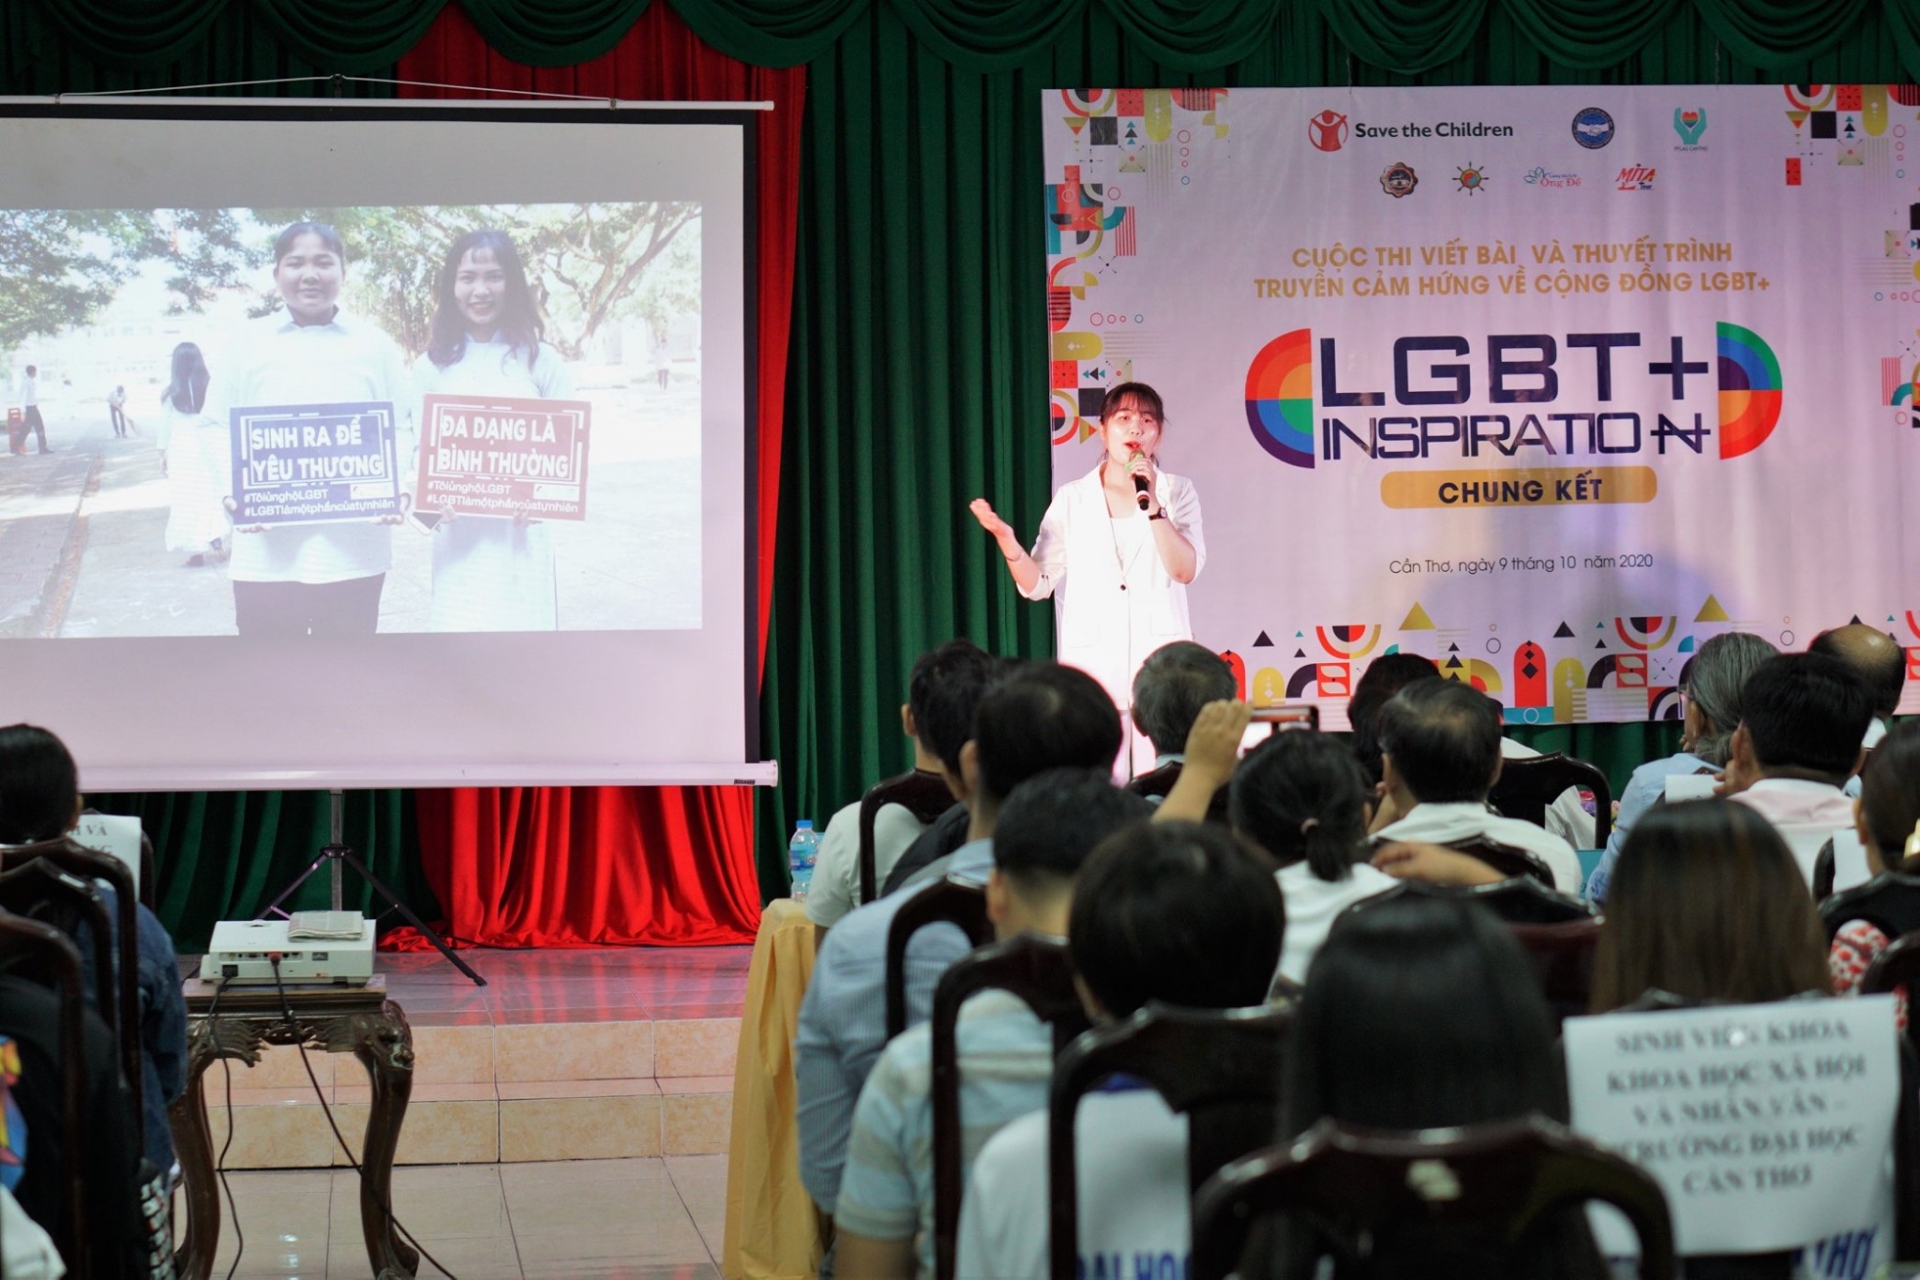 For the first time, can tho organizes contest to inspire learn about lgbt+ community